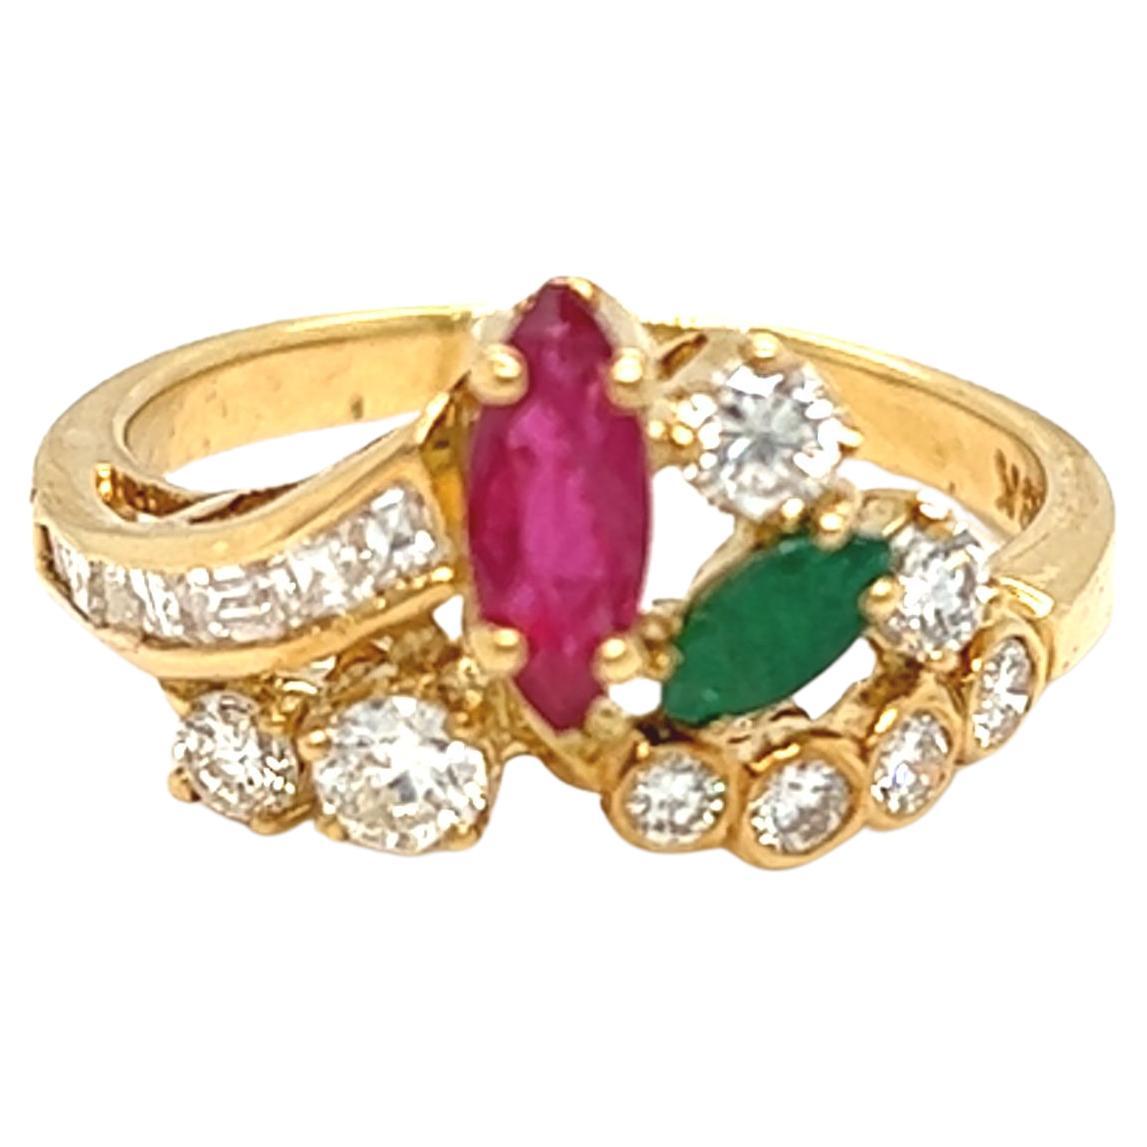 From our estate jewelry collection, this handcrafted 18k yellow gold cluster gemstone and diamond ring features a marquise shaped ruby and emerald and mixed cut diamonds. The total weight of diamond is approximately 1 carat with G color and VS1-2